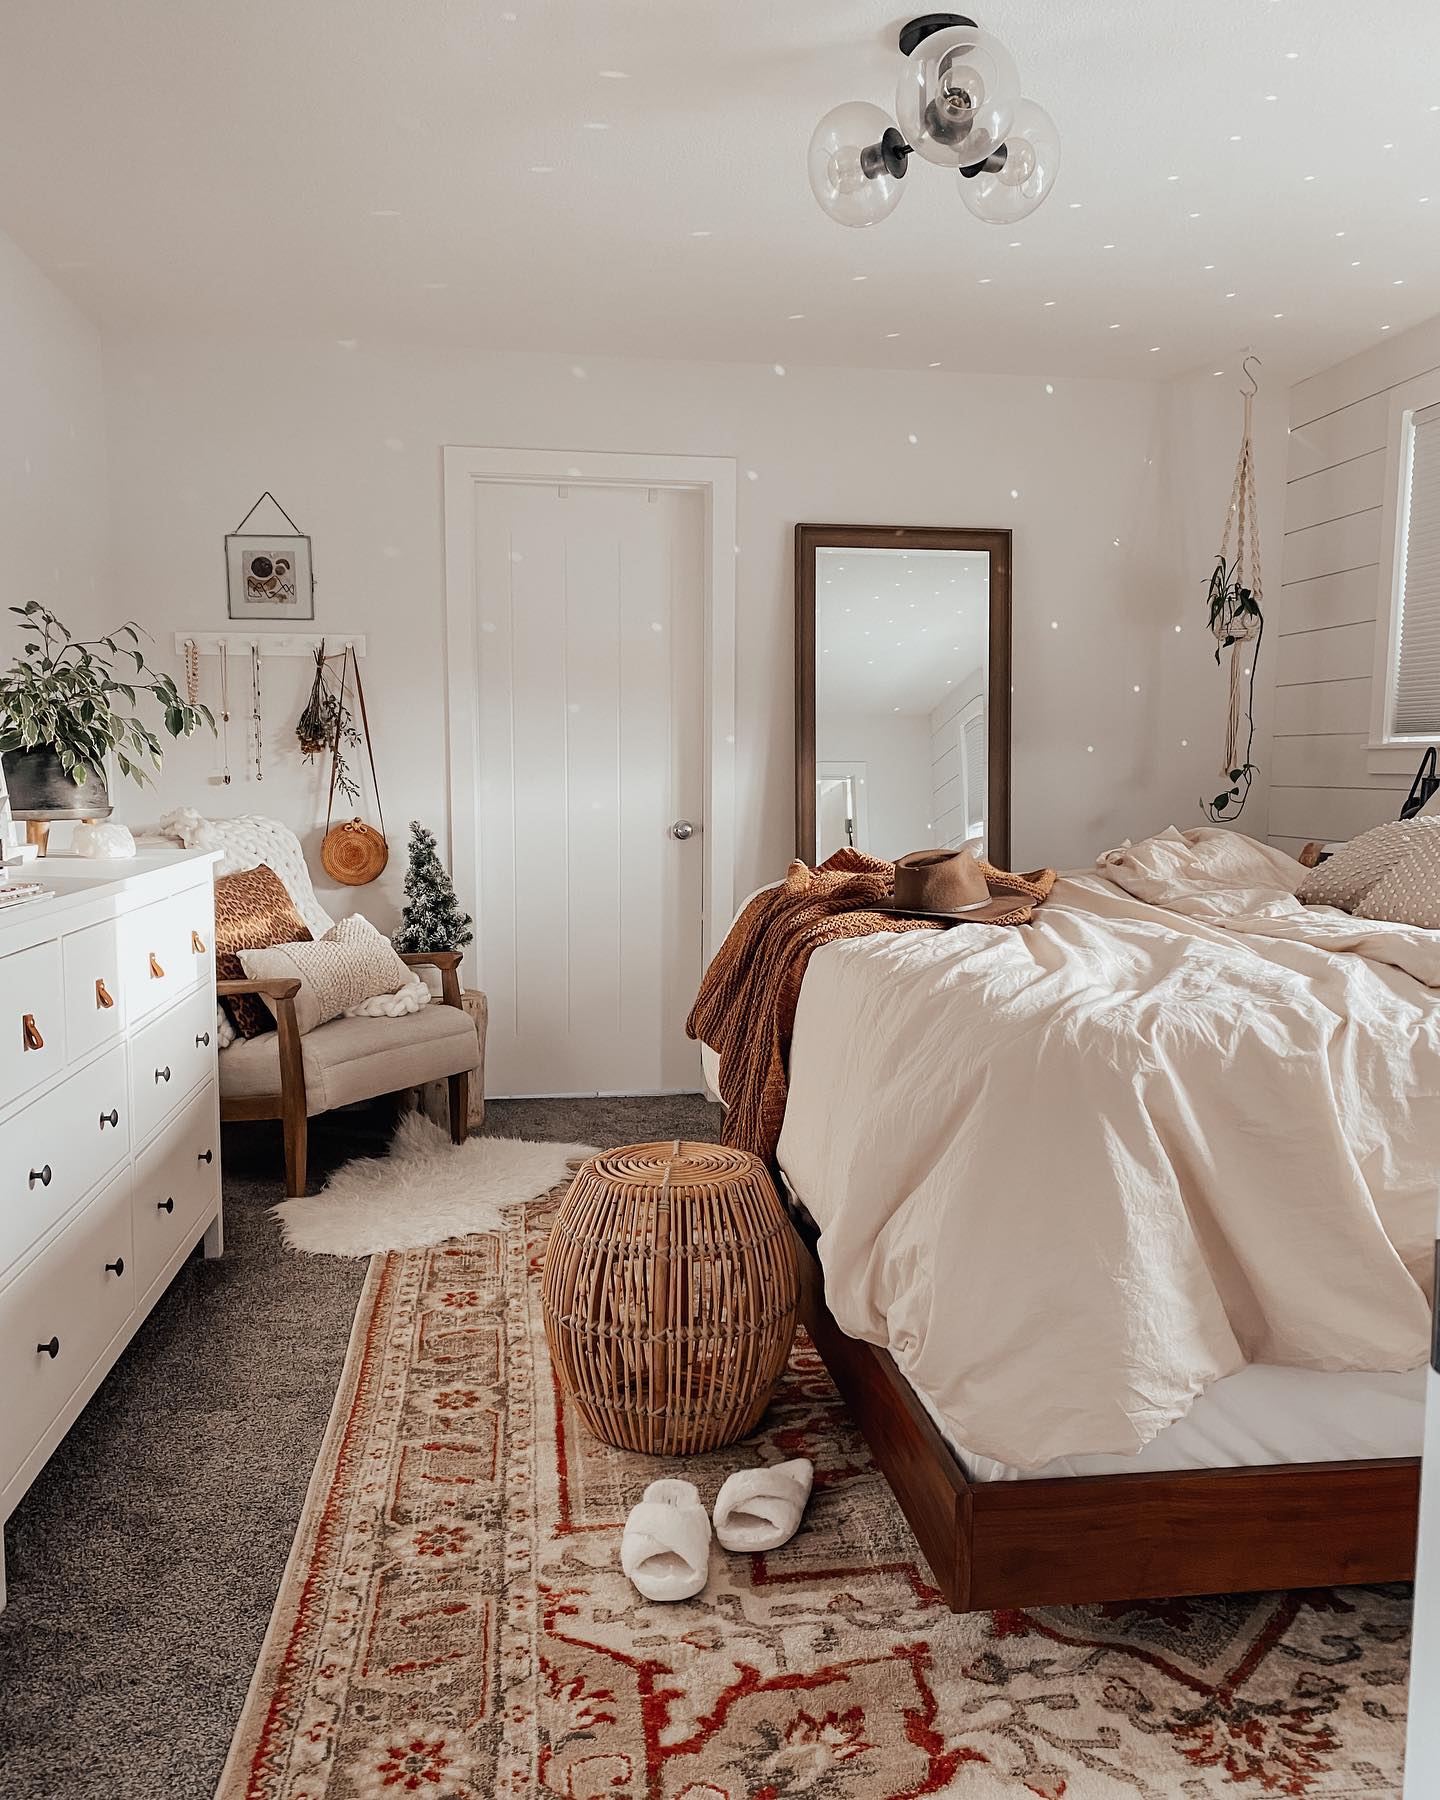 Rugs Under Beds: Dreamy Decorating Do's for the Bedroom - The